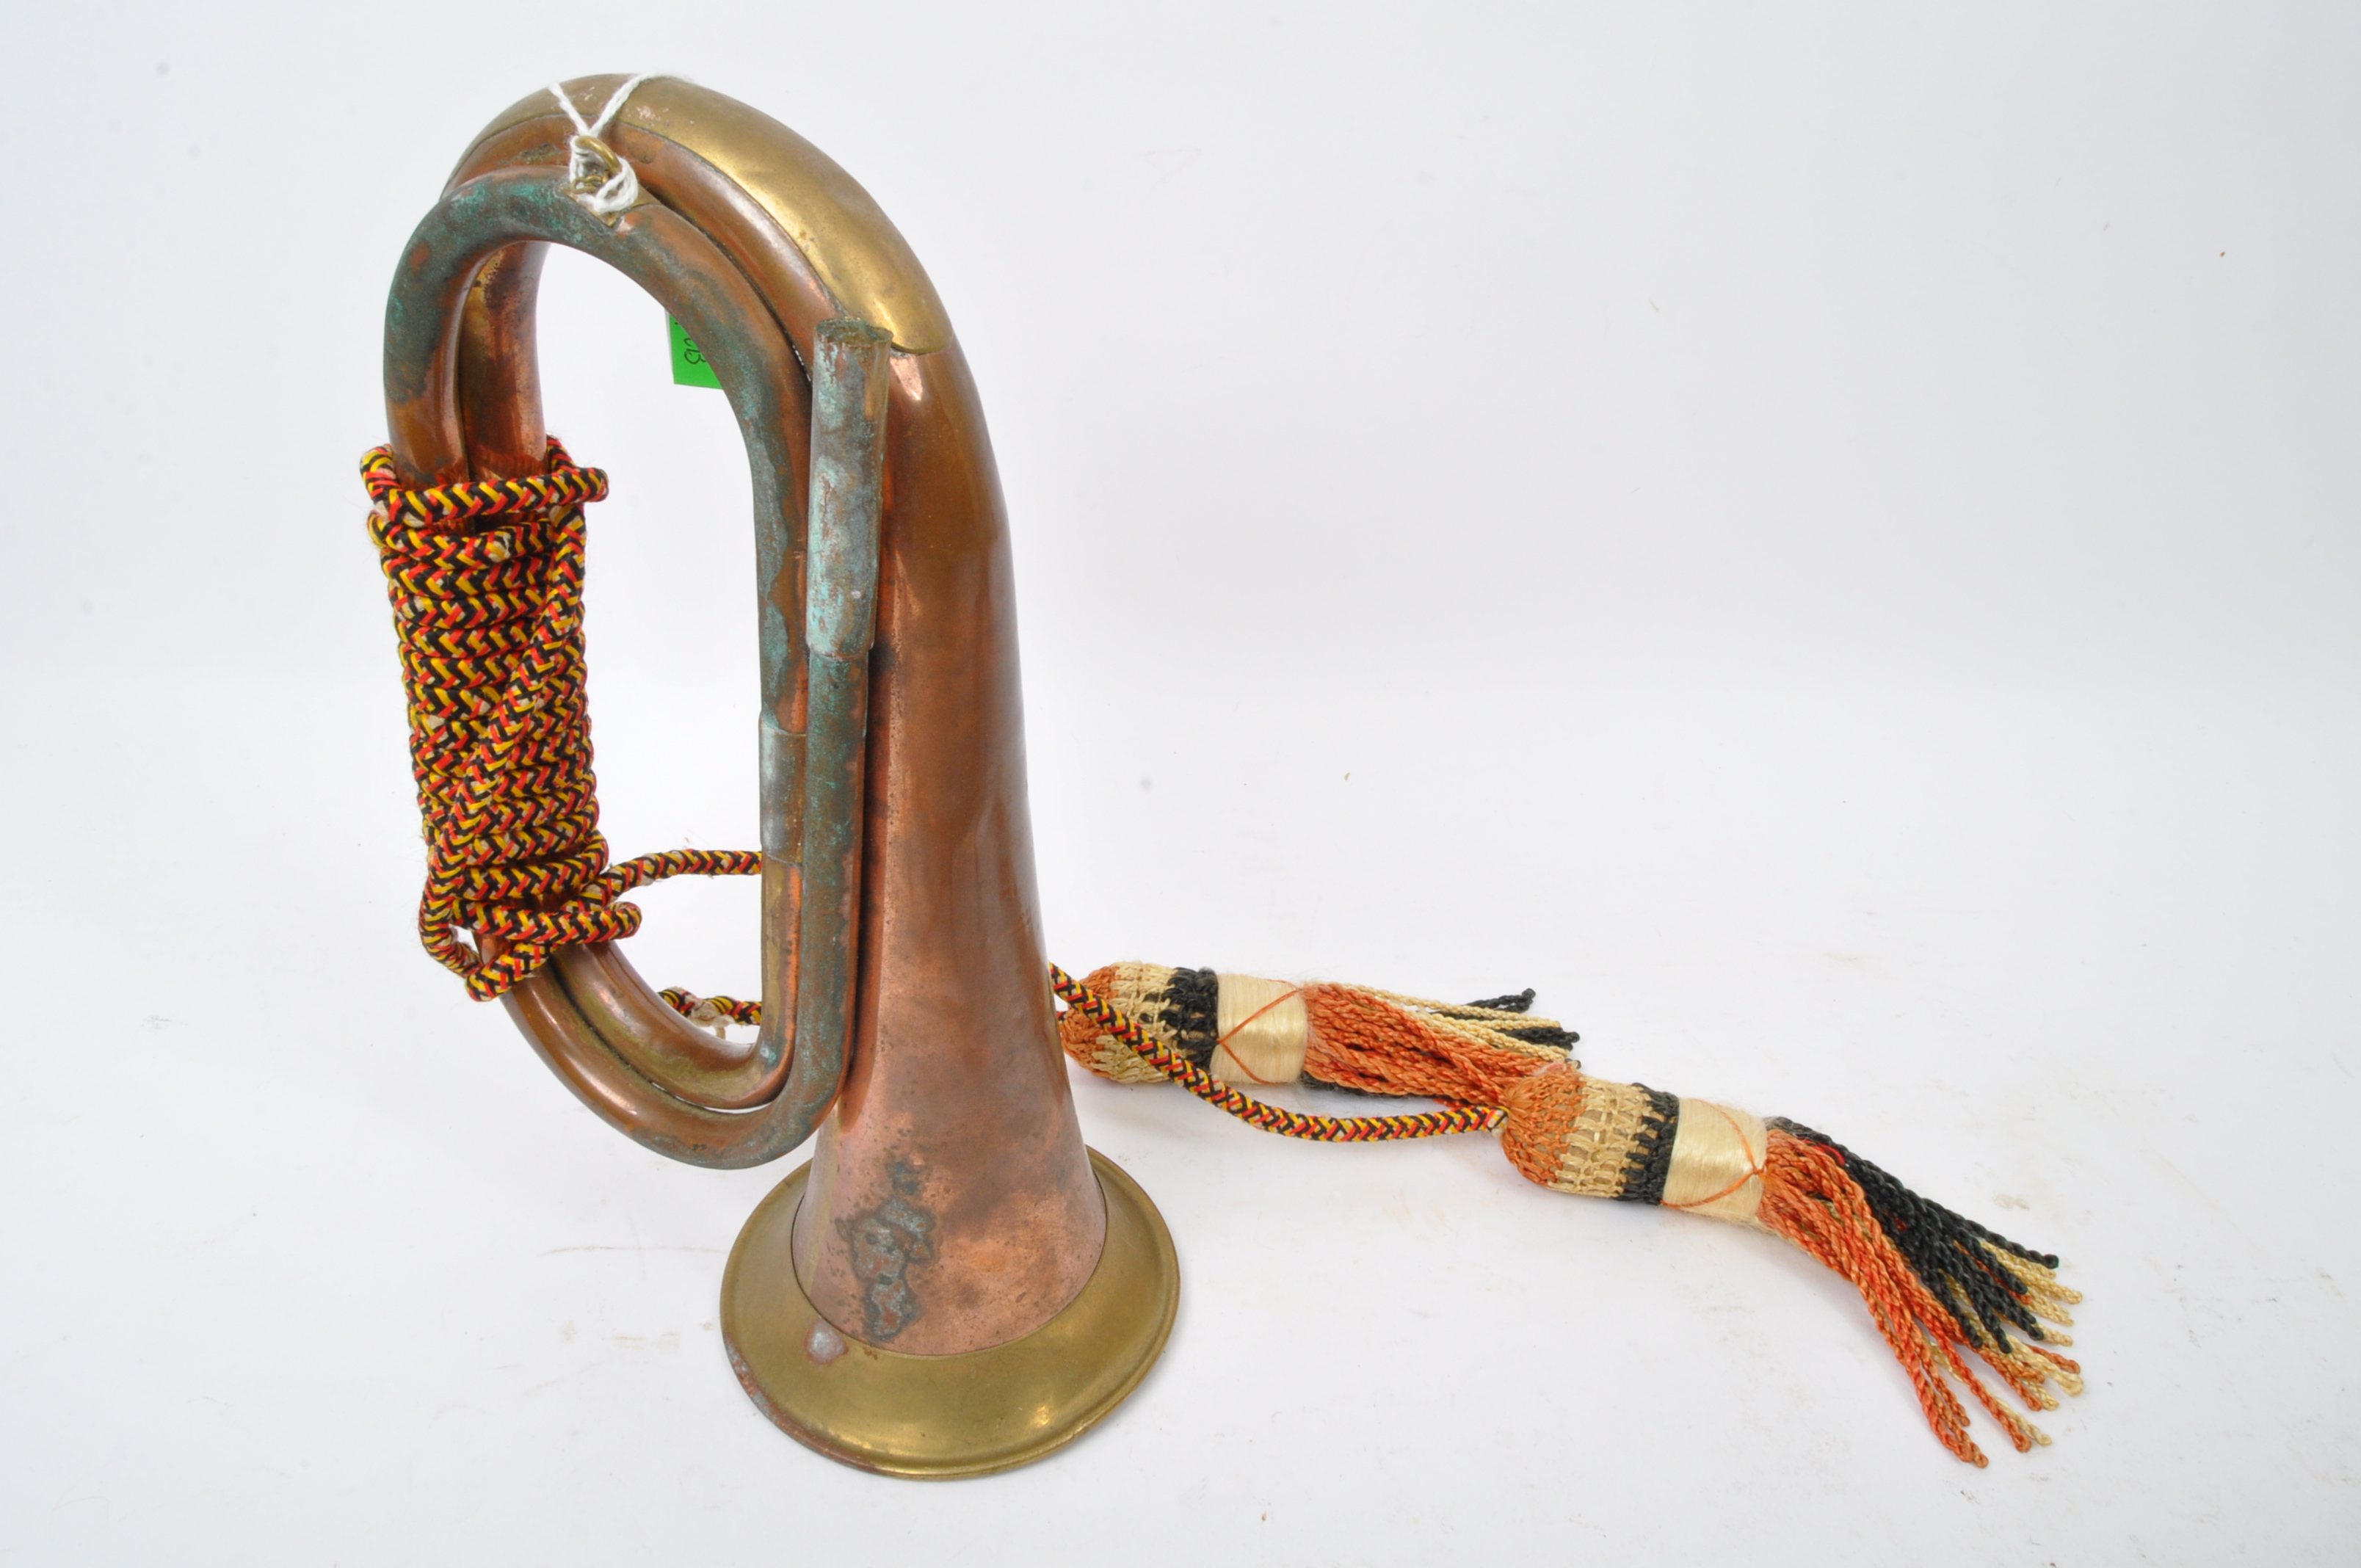 PAIR OF 20TH CENTURY COPPER HORNS - POST HORN & BUGLE - Image 3 of 7